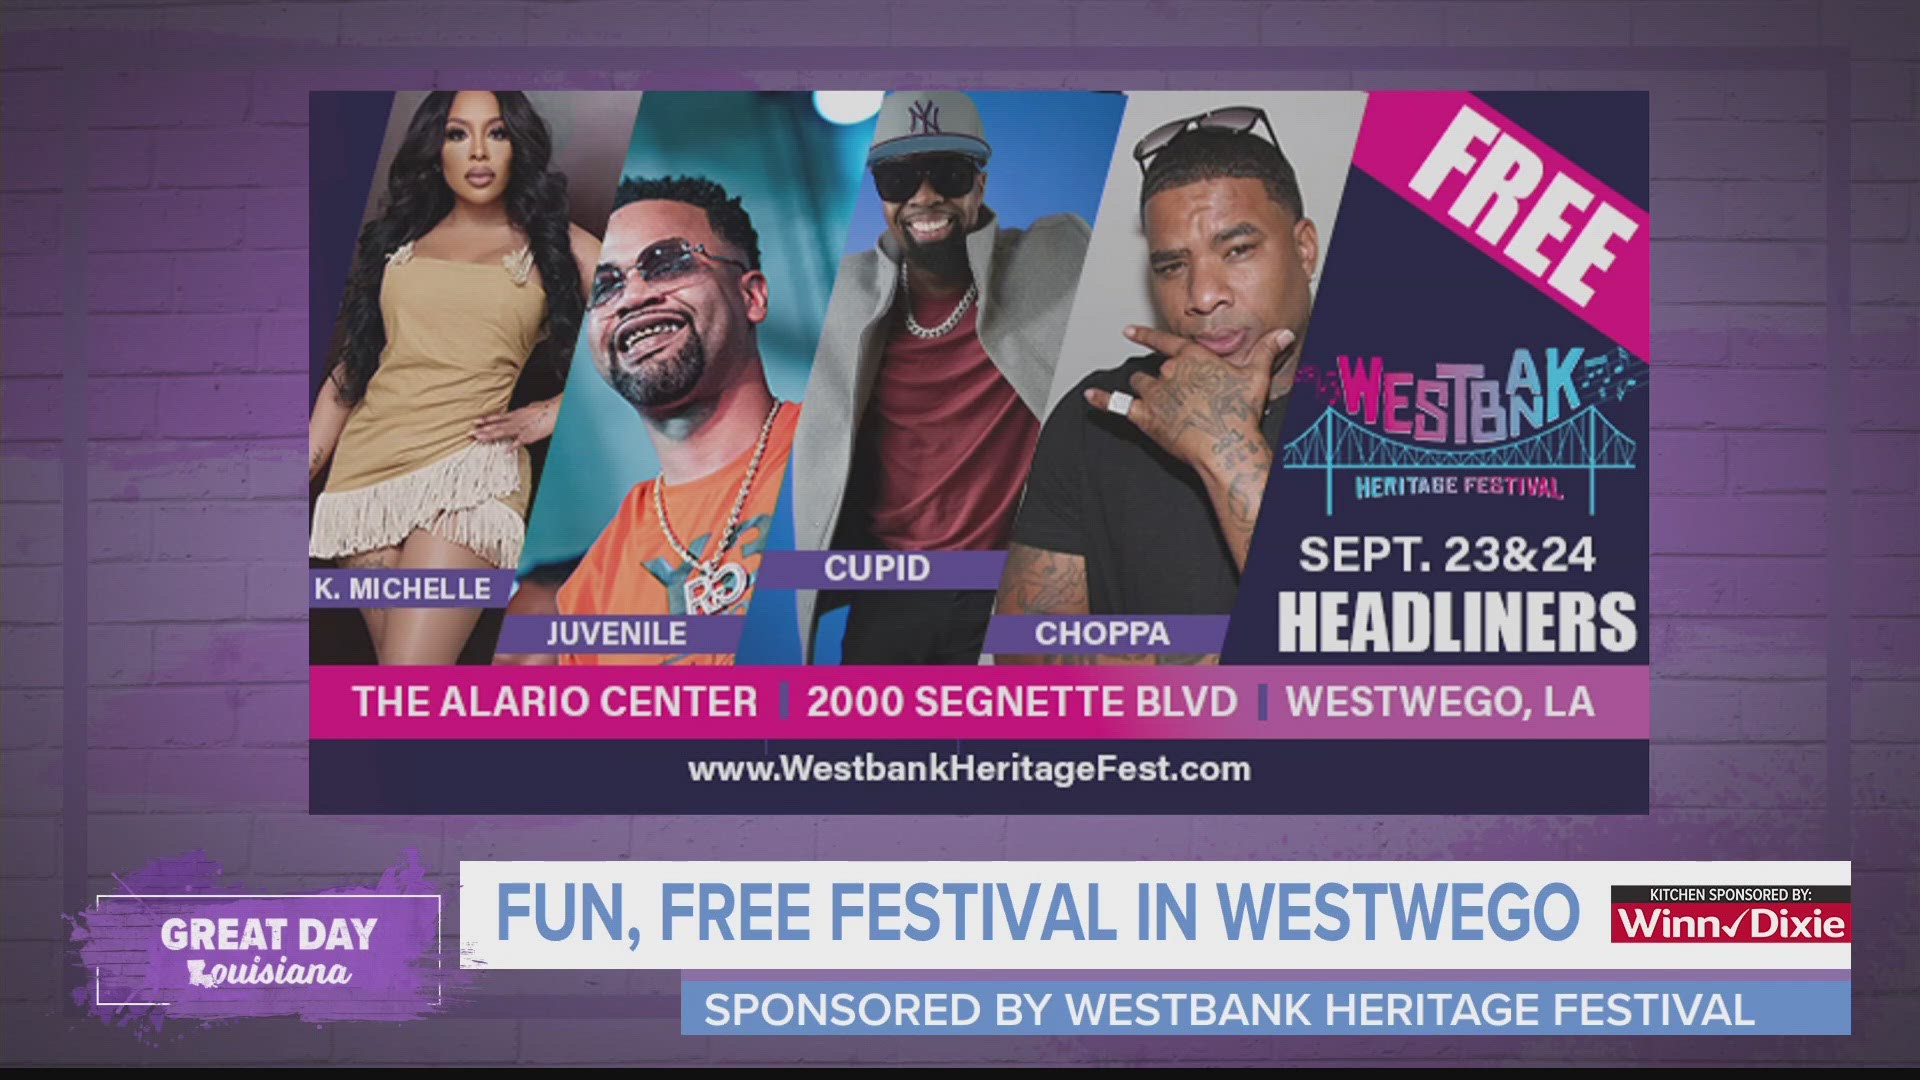 See K. Michelle, Juvenile and more at the Westbank Heritage Festival September 23rd and 24th in Westwego. Admission is free.